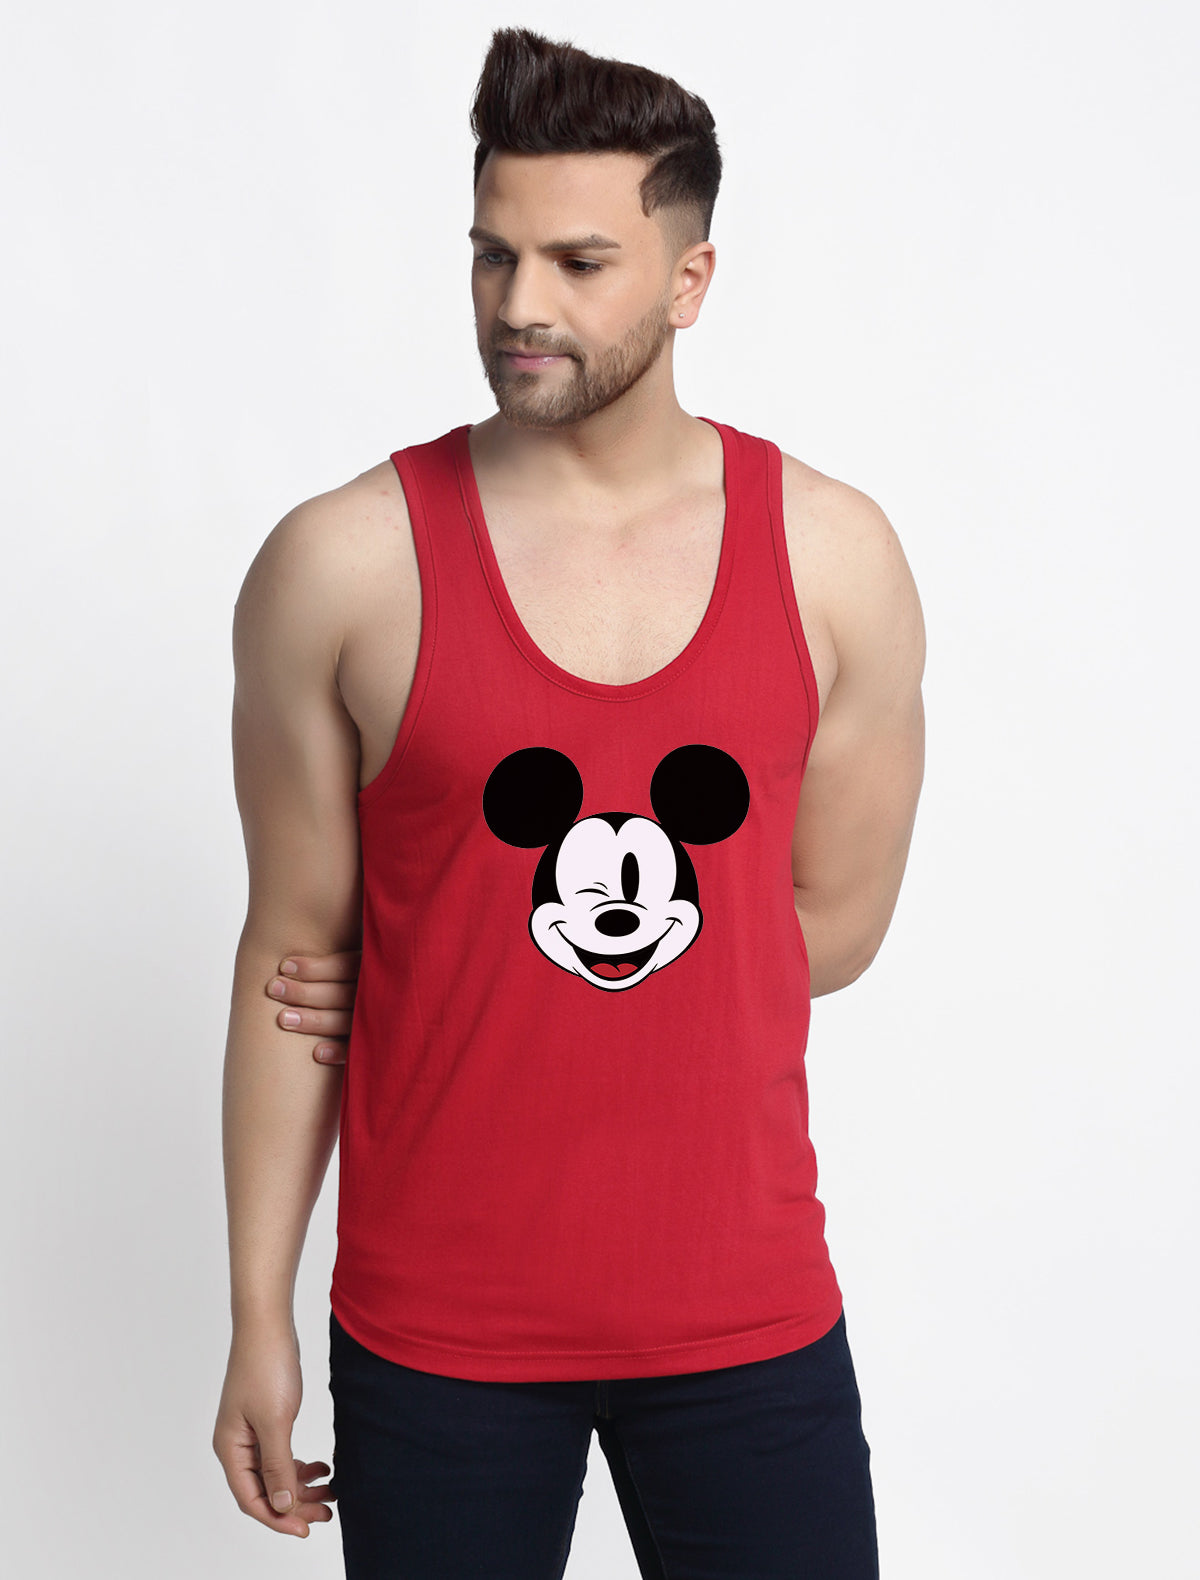 Micky Mouse Printed Innerwear Gym Vest - Friskers